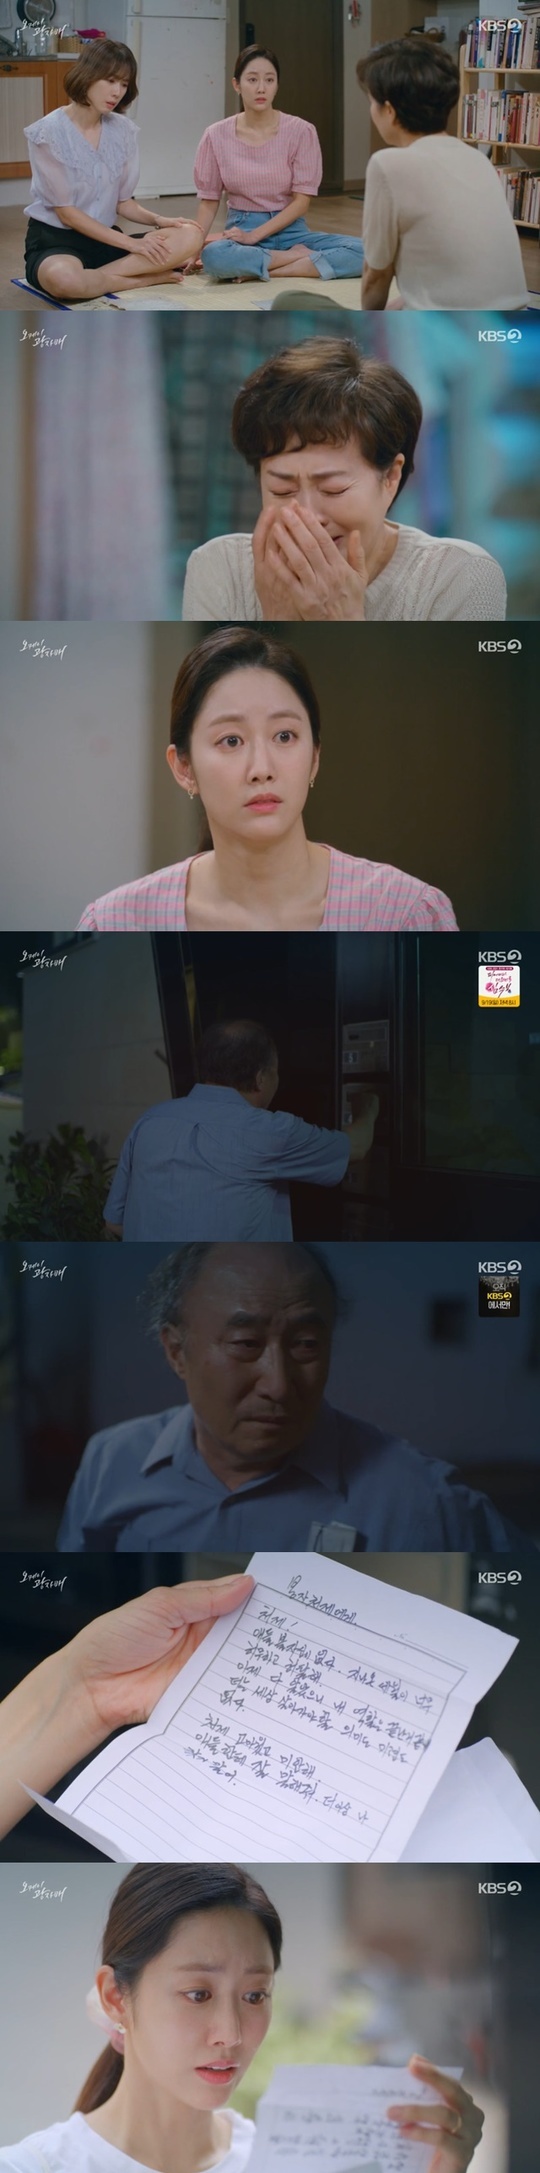 All three sisters of Photosisters were found to have different fathers, adding to the shock by the past history of the fraudulently married Yoon Joo-sang.In the 48th episode of KBS 2TVs weekend drama OK Photo Sisters (playplayed by Moon Young-nam/directed by Lee Jin-seo), which aired on September 11, Oh Bong-ja (played by Lee Bo-hee) revealed the truth hidden by her nephew Lee gwang-nam (Hong Eun Hee) and Lee Kwang-sik (played by Jeon Hye-bin).While the youngest son Lee Kwang-tae (Ko Won-hee) and his father, Nazi Bum (Chung Seung-ho), came to the house and was shocked by the birth secret that Lee Kwang-tae was not the biological daughter of Lee Cheol-soo (Yoon Joo-sang), Oh Bong-ja also revealed the truth to his nephews, Lee gang-nam and Lee Kwang-sik.Oh Bong-ja found his brother-in-law Lee Cheol-soos diary and took out a memorandum stating, I will not find Gwangnam until I die. The person who wrote the memorandum was the father of Lee gang-nam.Lee Wang-nam was not Lee Cheol-sus biological daughter.Your fathers memorandum, Oh said, and your brother came to a youth retreat during his third year in college and spent the night with your mother, and a few days later your mother went to his house and lay down on the floor of Daecheong.Im sorry, said the older brother, who was the eldest son of the yangban house, and was afraid of local rumors. Your mother was in a pregnancy state with another boy.Lee gang-nams father was so poor that he opposed marriage in the family, and the photon mother-in-law used the innocent Lee Chul-soo as Temptation.Lee Cheol-soo married a misfortune and started to work at home and pierced the toilet, and he knew that Lee gang-nam was not my own daughter, but he accepted the situation in the persuasion of Oh Bong-ja.Lee Chul-soos son, Lee Kwang-sik, also appeared, but Lee Chul-soo went to Saudi Arabia and a dancer was locked in the room and went out and died in a fire.Lee Kwang-sik (Jeon Hye-bin) was surprised to receive the same memorandum with his fathers father while comforting the shocked Sister Lee gang-nam.After losing his son Lee Kwang-sik, his daughter Lee Kwang-sik was born, but Lee Chul-soo had already undergone a vasectomy in the country.Lee Cheol-soo tried to divorce again this time, but eventually accepted Lee Kwang-sik after Lee gwang-nam, not my own daughter, in the persuasion of Oh Bong-ja.Since then, Lee Kwang-tae has continued to be a fan of the misfortune, but Lee Chul-soo has raised all three daughters as his own daughter and recorded the traces of his father in the diary.My brother gave up everything as a man and lived as your father, Oh said of Lee Cheol-soos diary, you left all three of your fathers traces, a memorandum.I was afraid youd find your own father, but I was worried that you would turn away from him as your own father. Your fathers blood is only dead, he said.I lived with guilt, watching from the side, catching my brothers ankles, Obongja said.I was also tired, he said, and Lee gang-nam and Lee Kwang-sik shared all the truth to their brother Lee Kwang-tae, saying, We are in the same situation. Lee Kwang-tae, who ran away from home, returned, but this time, Lee Chul-soo told Oh Bong-ja, I think my role is over now that I know it.Tell them, dont look for me anymore. She ran away, leaving a meaningful letter.